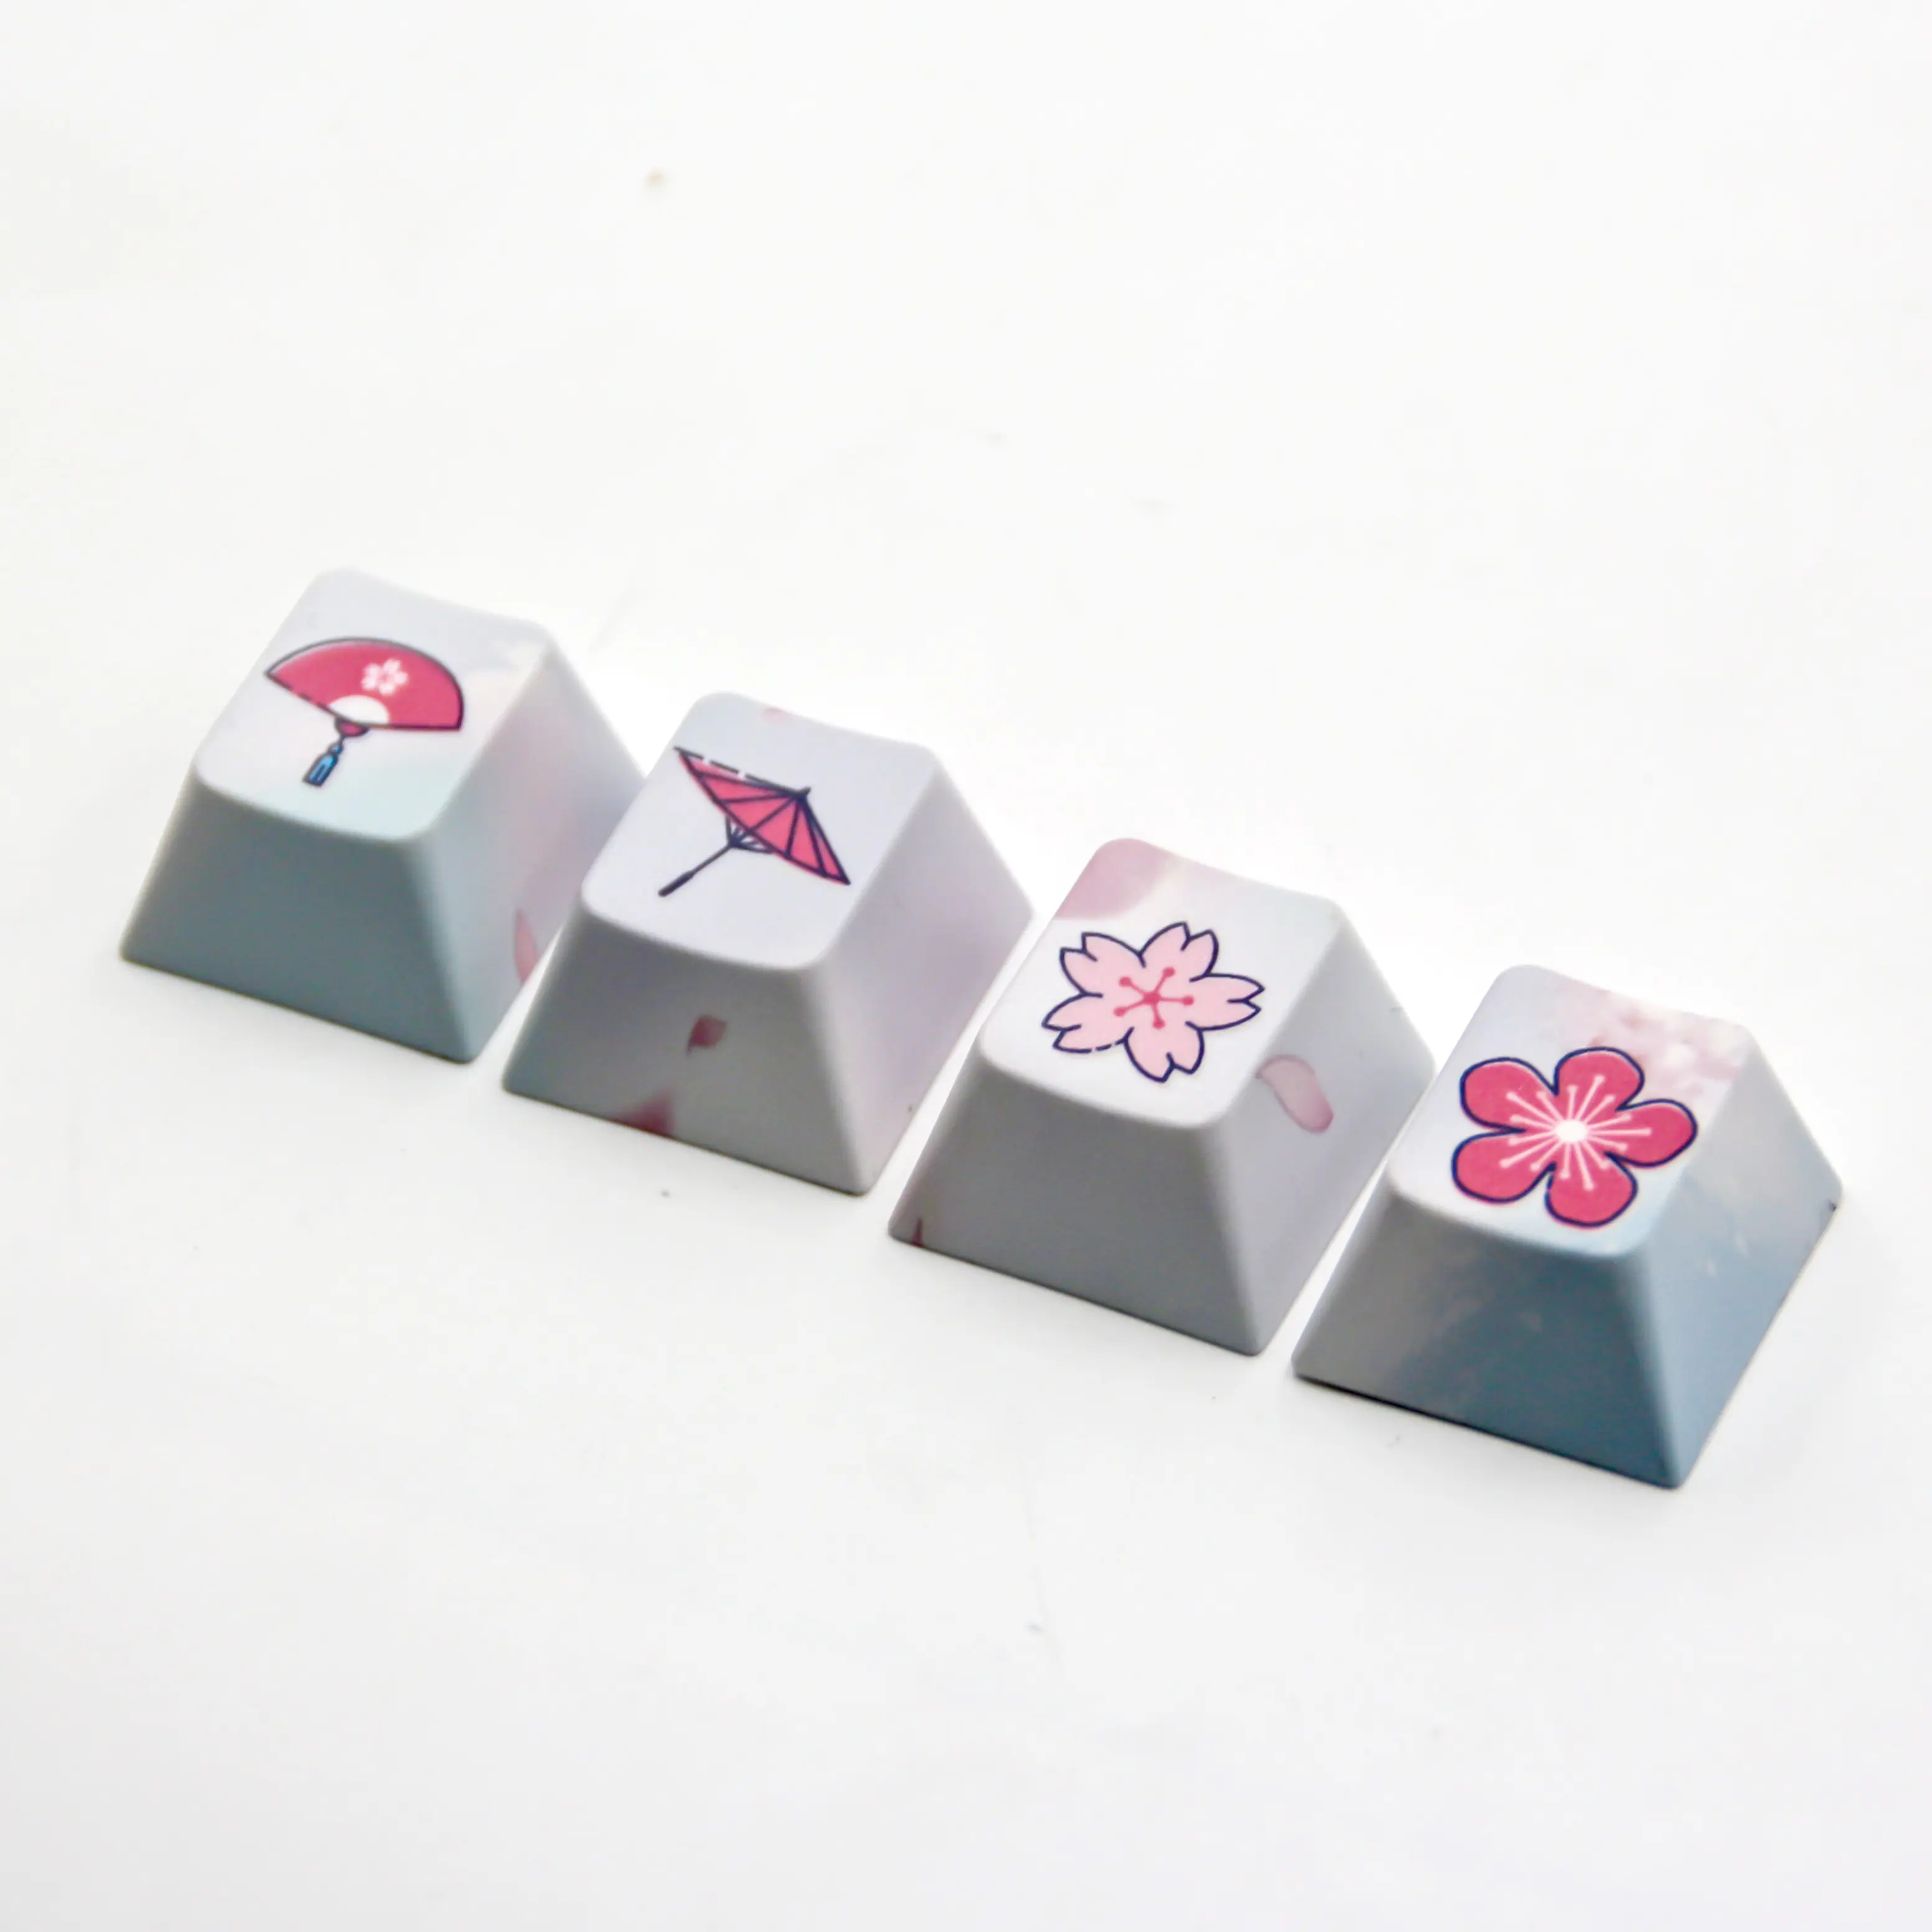 Subbank Wholesale Blank PBT Keycaps Customized 104-key Mechanical Keyboard Cap For Computer Game Players